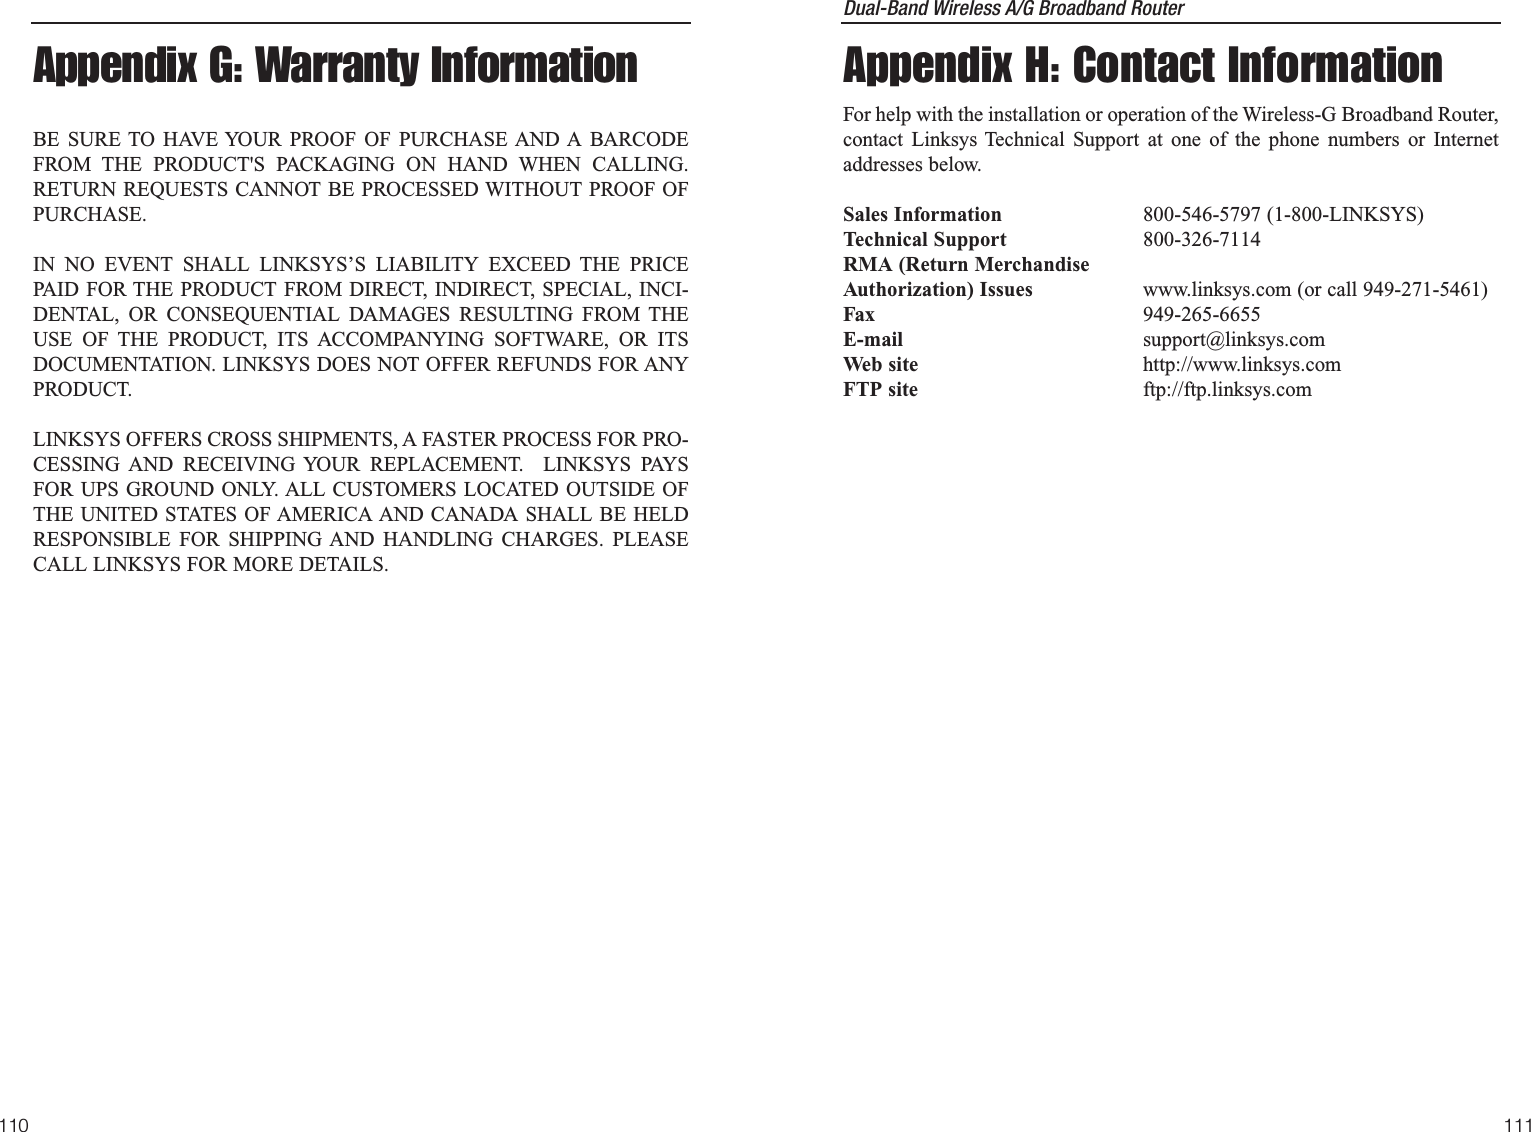 Dual-Band Wireless A/G Broadband Router Appendix H: Contact InformationFor help with the installation or operation of the Wireless-G Broadband Router,contact Linksys Technical Support at one of the phone numbers or Internetaddresses below.Sales Information 800-546-5797 (1-800-LINKSYS)Technical Support 800-326-7114RMA (Return MerchandiseAuthorization) Issues www.linksys.com (or call 949-271-5461)Fax 949-265-6655E-mail support@linksys.comWeb site http://www.linksys.comFTP site ftp://ftp.linksys.com111110Appendix G: Warranty InformationBE SURE TO HAVE YOUR PROOF OF PURCHASE AND A BARCODEFROM THE PRODUCT&apos;S PACKAGING ON HAND WHEN CALLING.RETURN REQUESTS CANNOT BE PROCESSED WITHOUT PROOF OFPURCHASE. IN NO EVENT SHALL LINKSYS’S LIABILITY EXCEED THE PRICEPAID FOR THE PRODUCT FROM DIRECT, INDIRECT, SPECIAL, INCI-DENTAL, OR CONSEQUENTIAL DAMAGES RESULTING FROM THEUSE OF THE PRODUCT, ITS ACCOMPANYING SOFTWARE, OR ITSDOCUMENTATION. LINKSYS DOES NOT OFFER REFUNDS FOR ANYPRODUCT. LINKSYS OFFERS CROSS SHIPMENTS, A FASTER PROCESS FOR PRO-CESSING AND RECEIVING YOUR REPLACEMENT.  LINKSYS PAYSFOR UPS GROUND ONLY. ALL CUSTOMERS LOCATED OUTSIDE OFTHE UNITED STATES OF AMERICA AND CANADA SHALL BE HELDRESPONSIBLE FOR SHIPPING AND HANDLING CHARGES. PLEASECALL LINKSYS FOR MORE DETAILS.